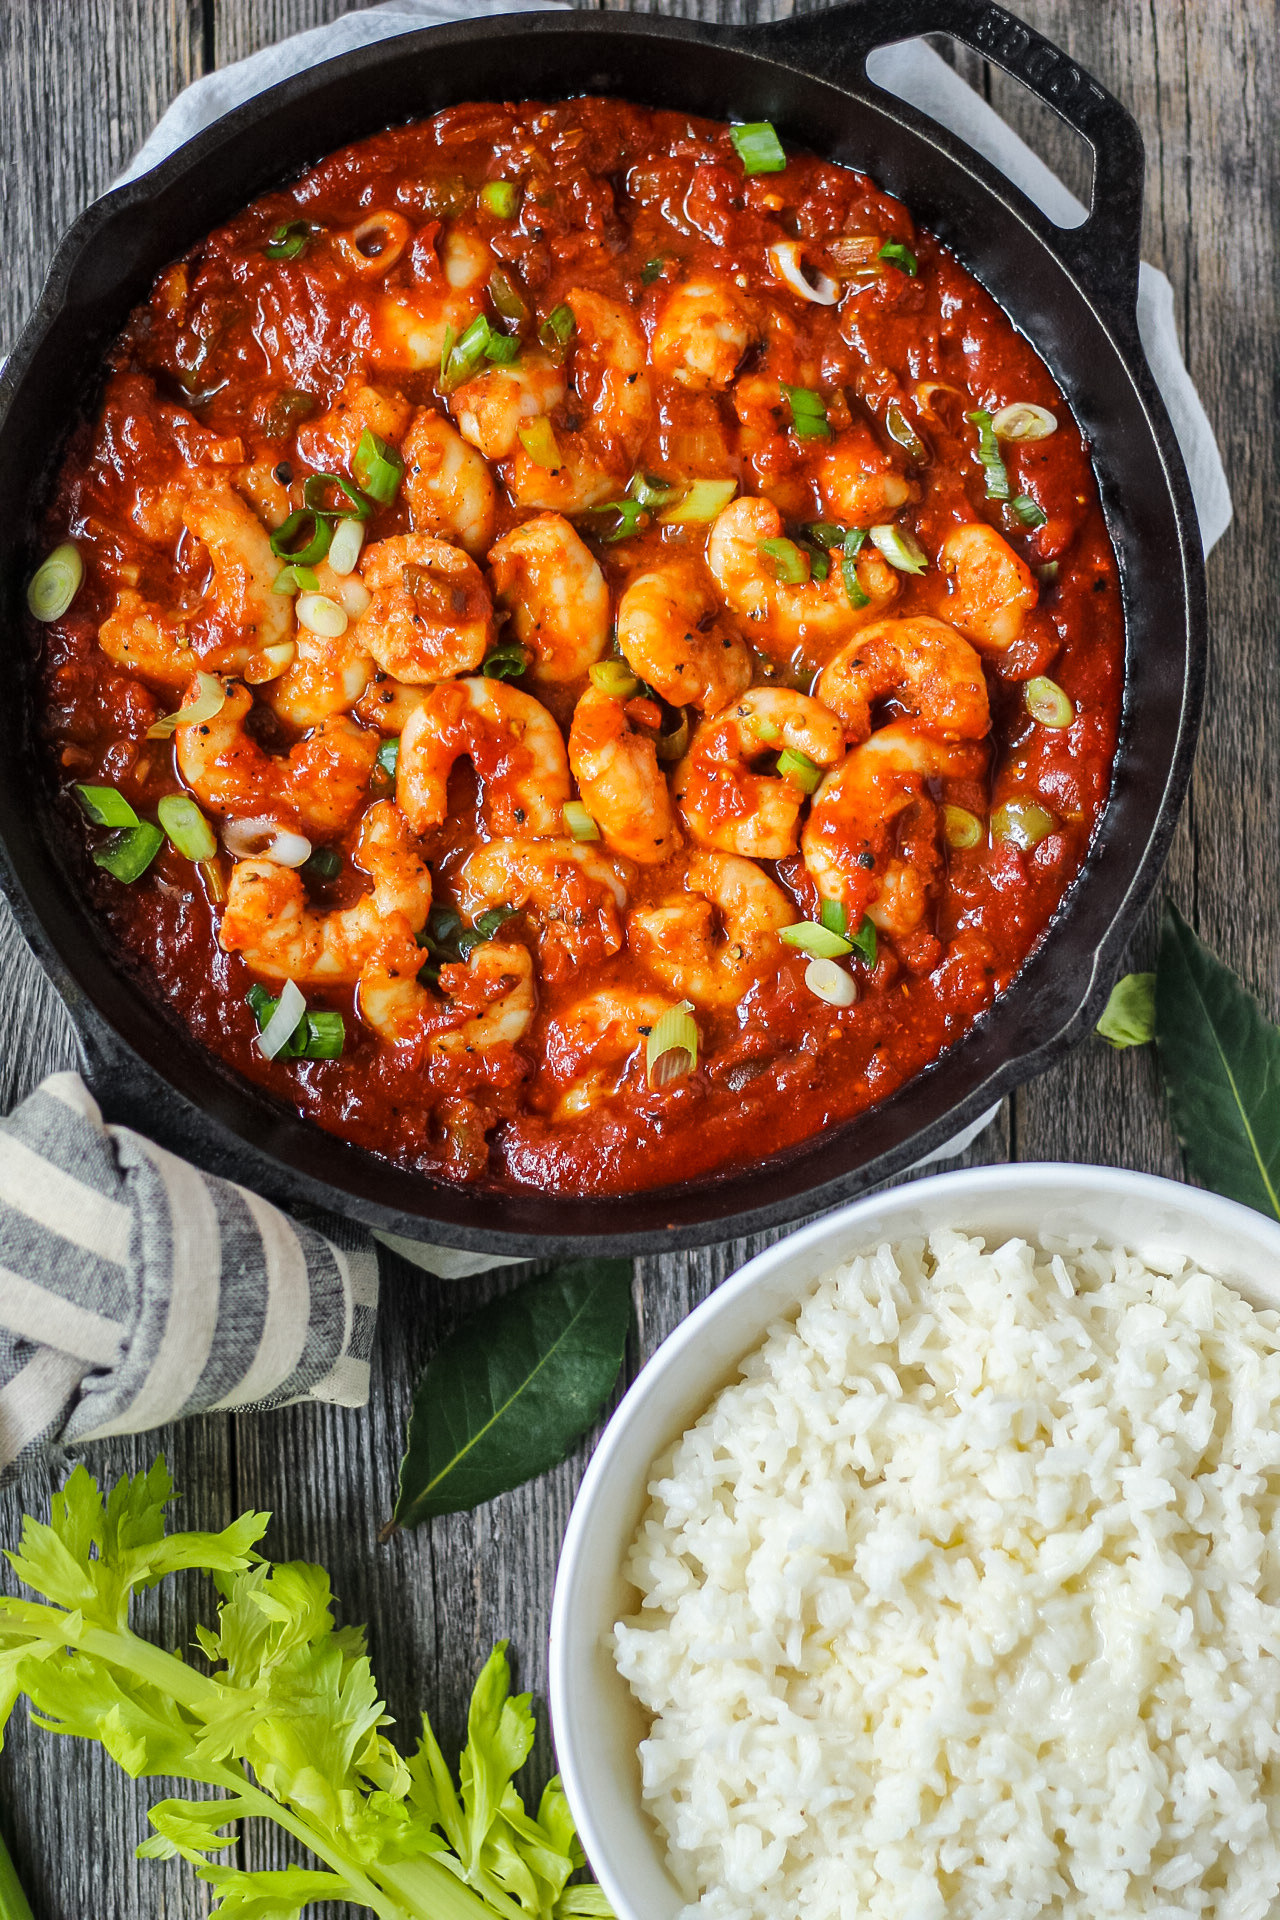 Juneteenth Cookout: Spicy Shrimp Creole from Pink Owl Kitchen